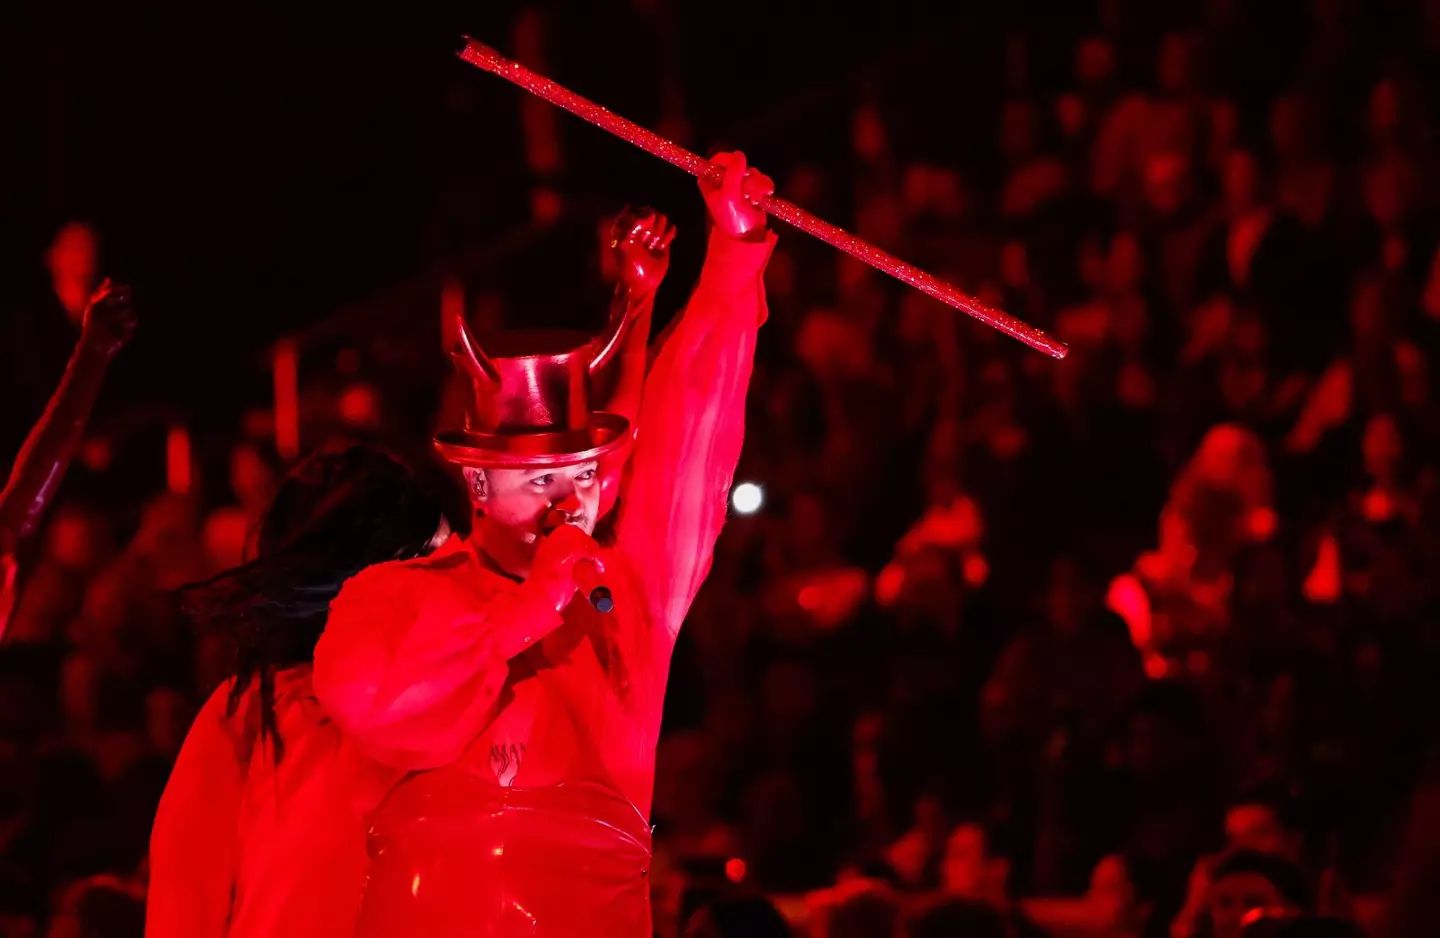 Sam Smith took to the stage dressed in a devil-inspired costume.